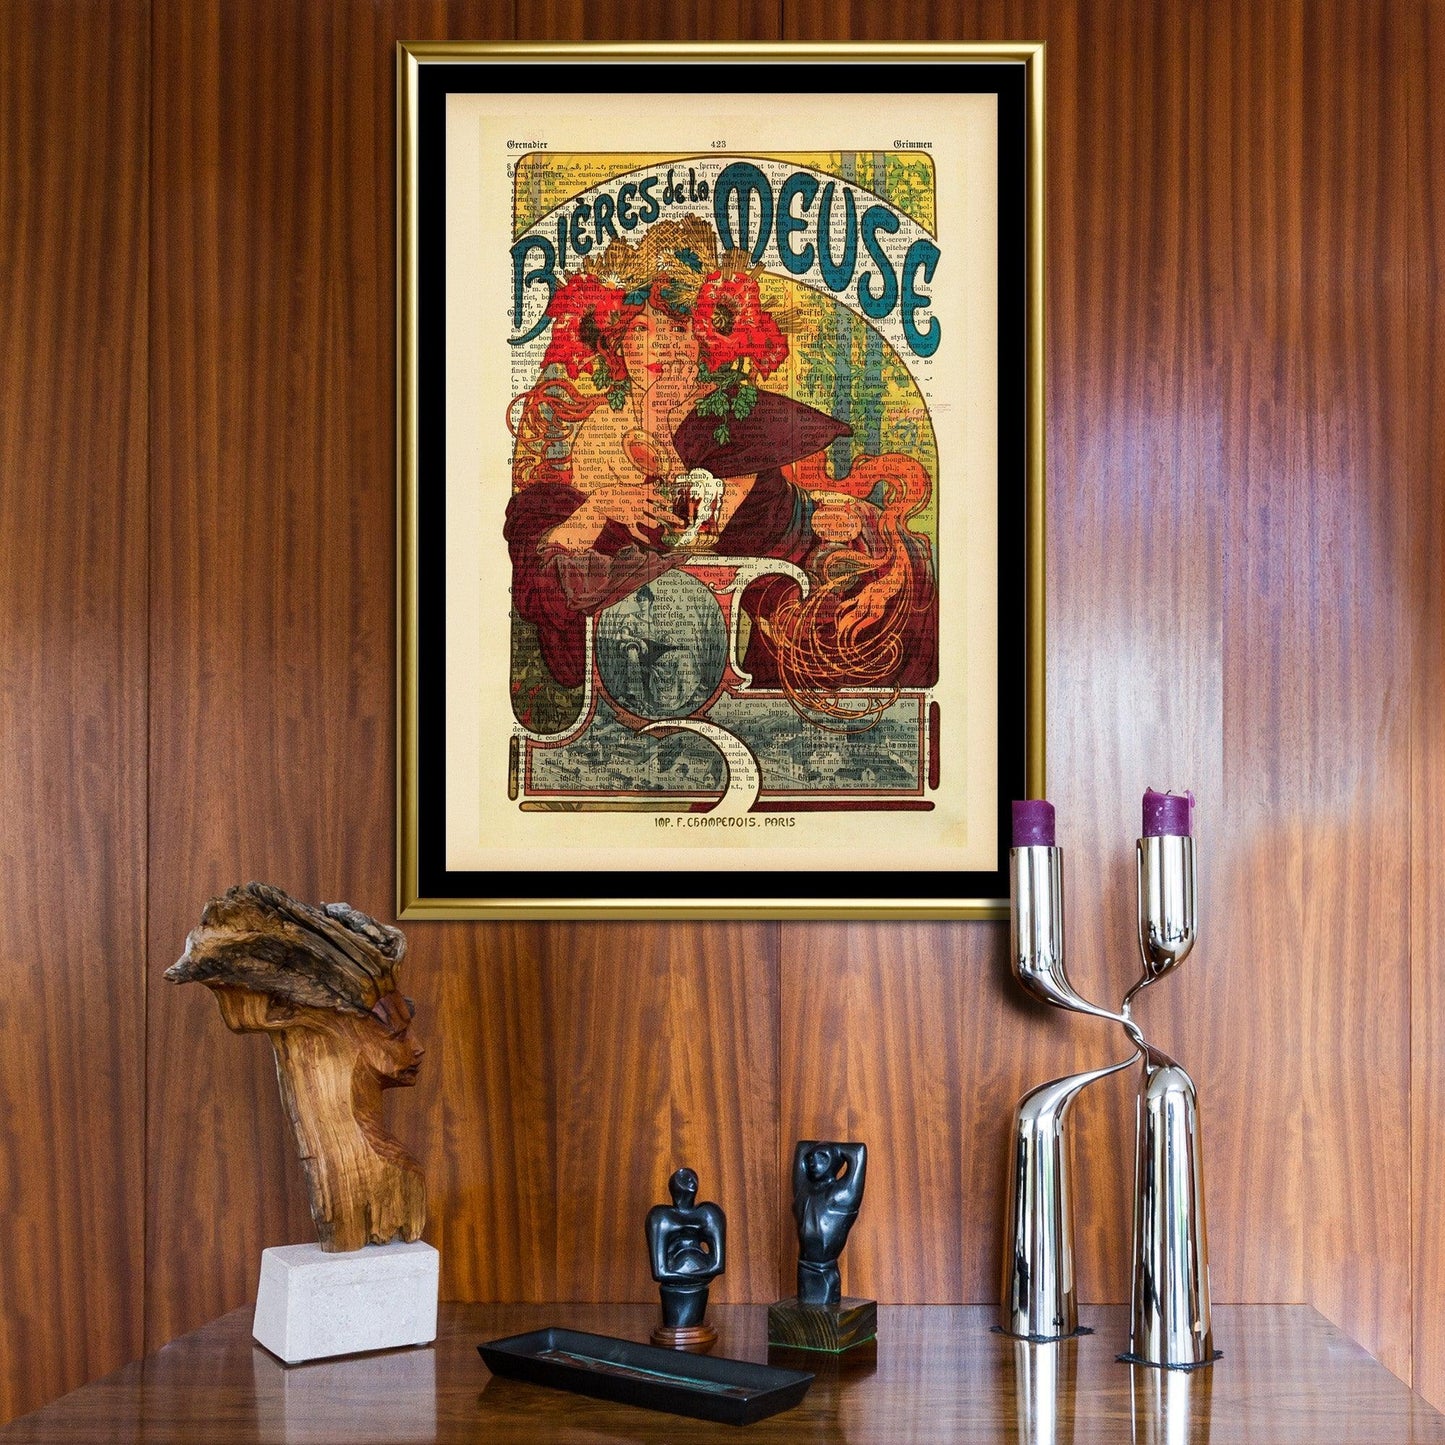 Give your home decor a touch of elegance through our exquisite Bieres de la Meuse reproduction poster. The artwork is a collage with the advertisements poster design by Alphonse Mucha (Czech graphic designer, 1860-1939). Year of created 1897.